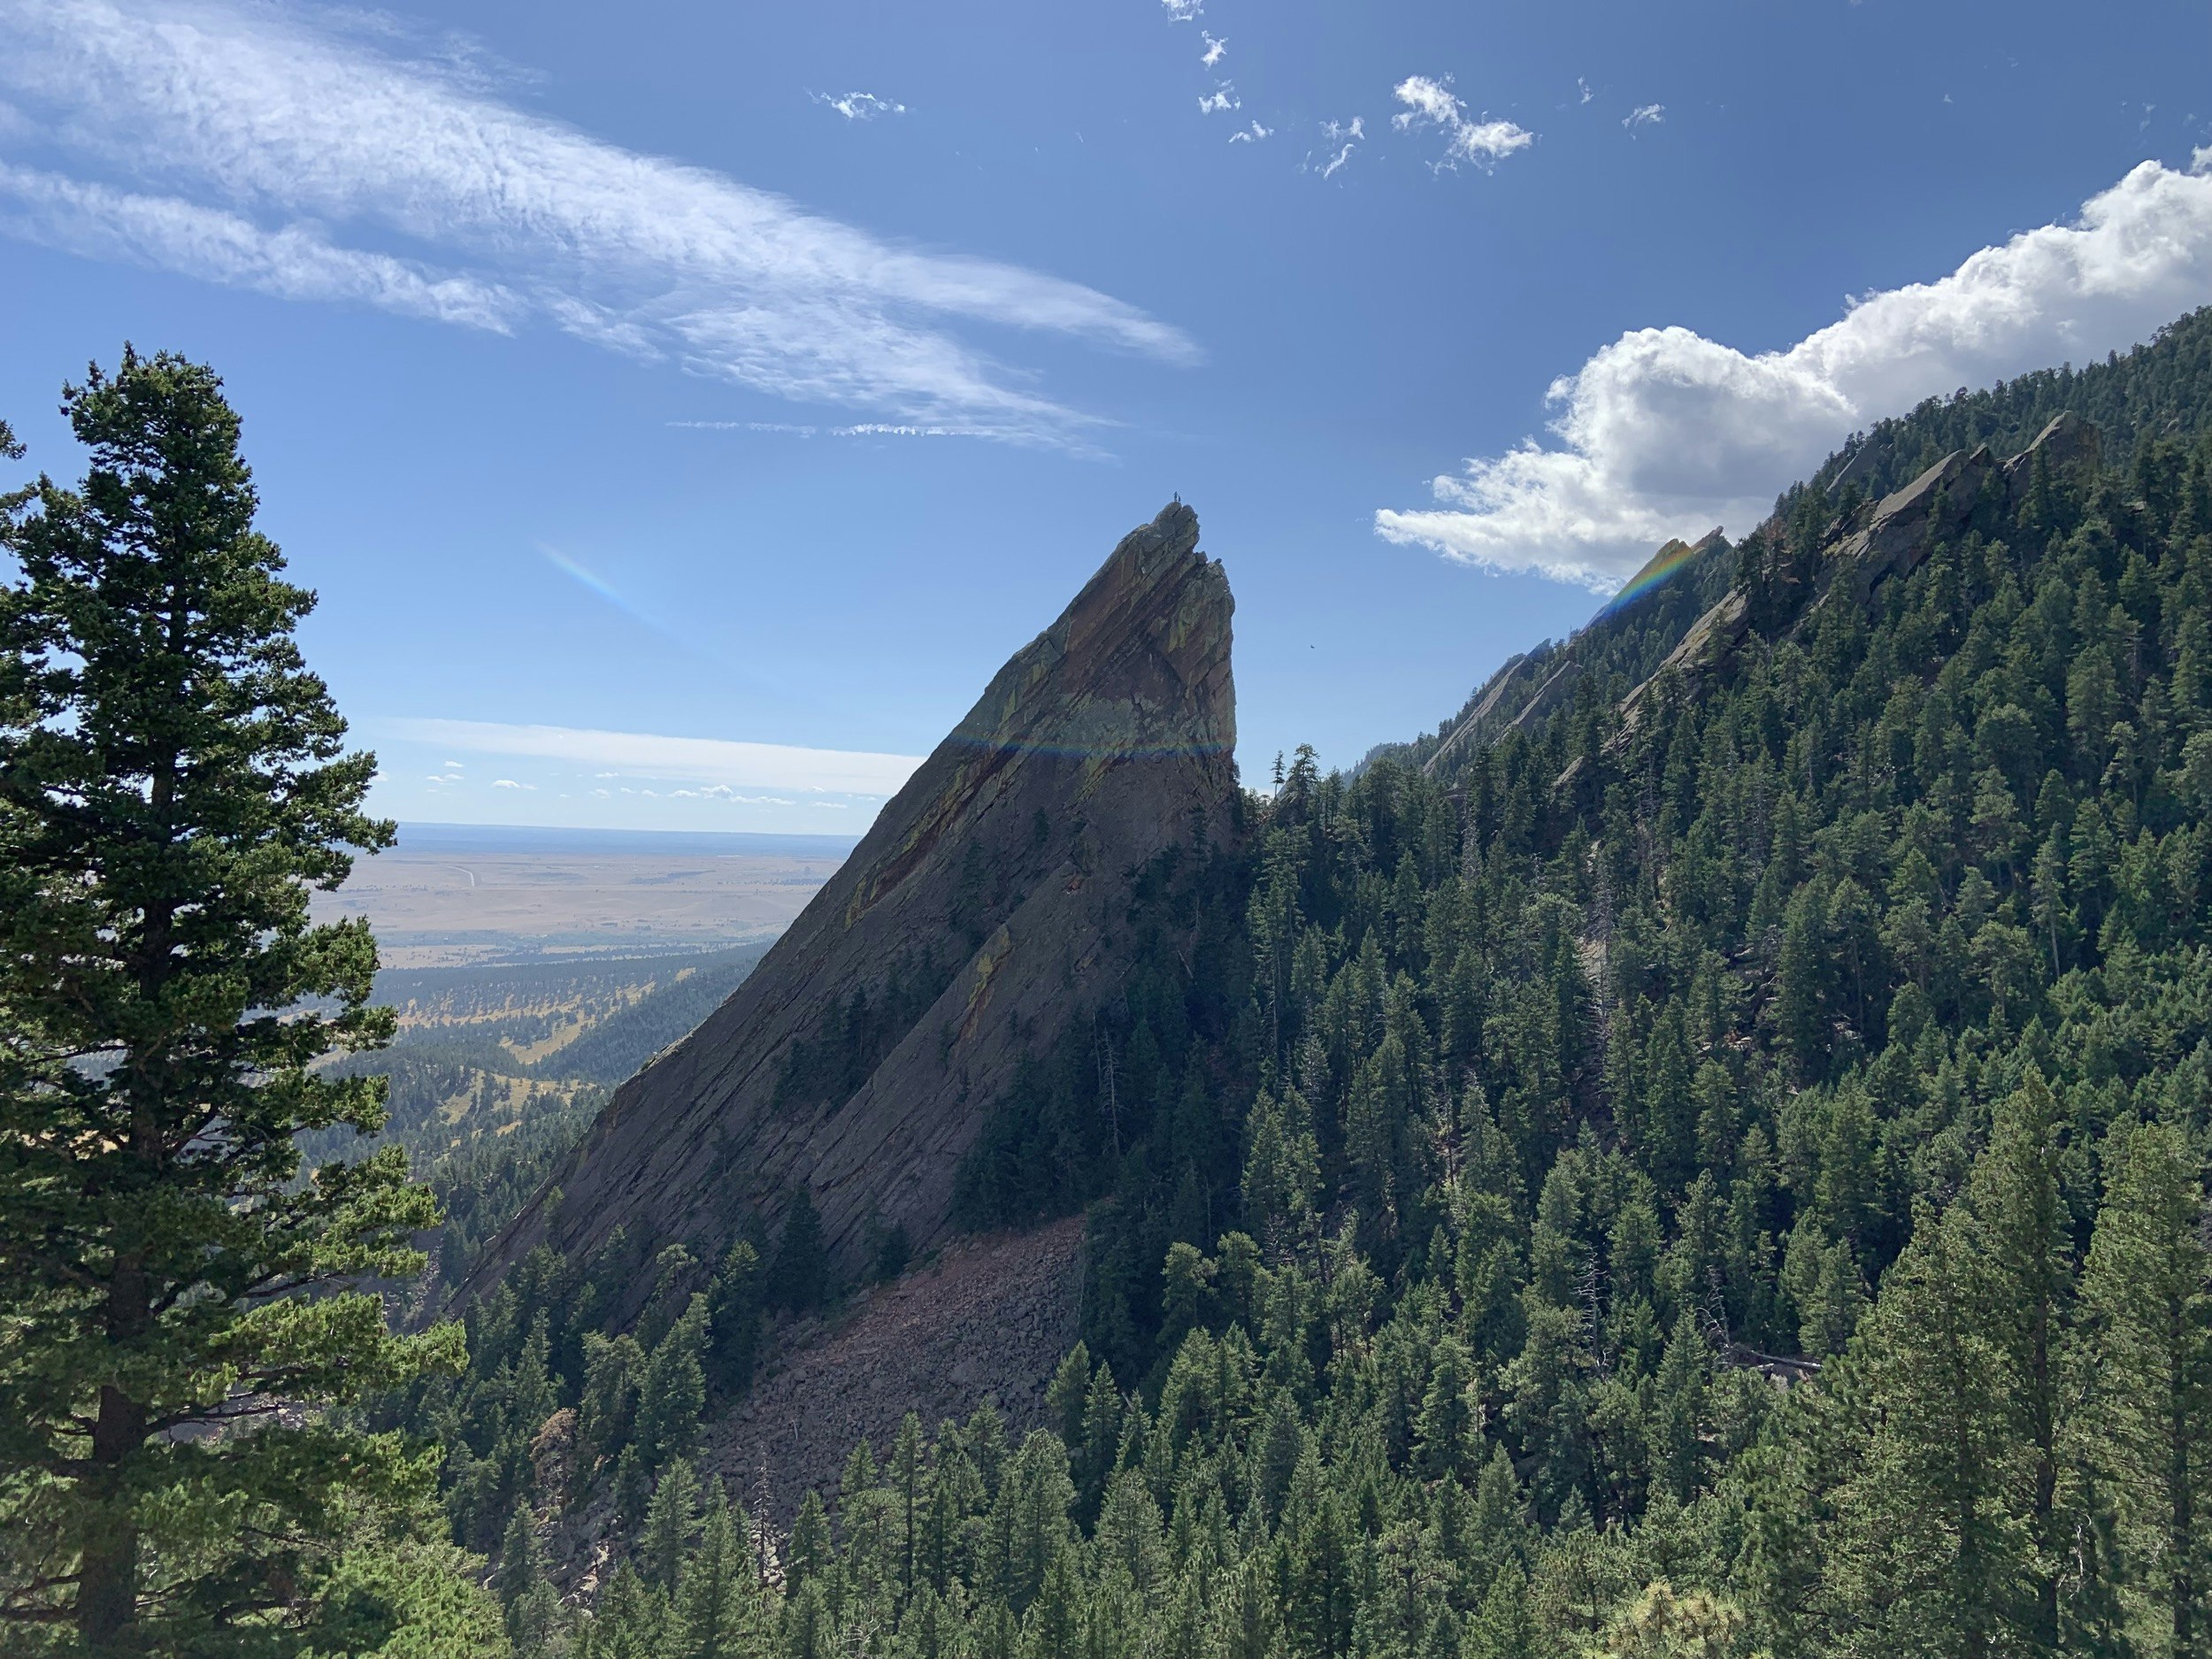 Looking across a valley at a jagged spire of rock with some climbers on top of it; Hiking in Boulder, Colorado